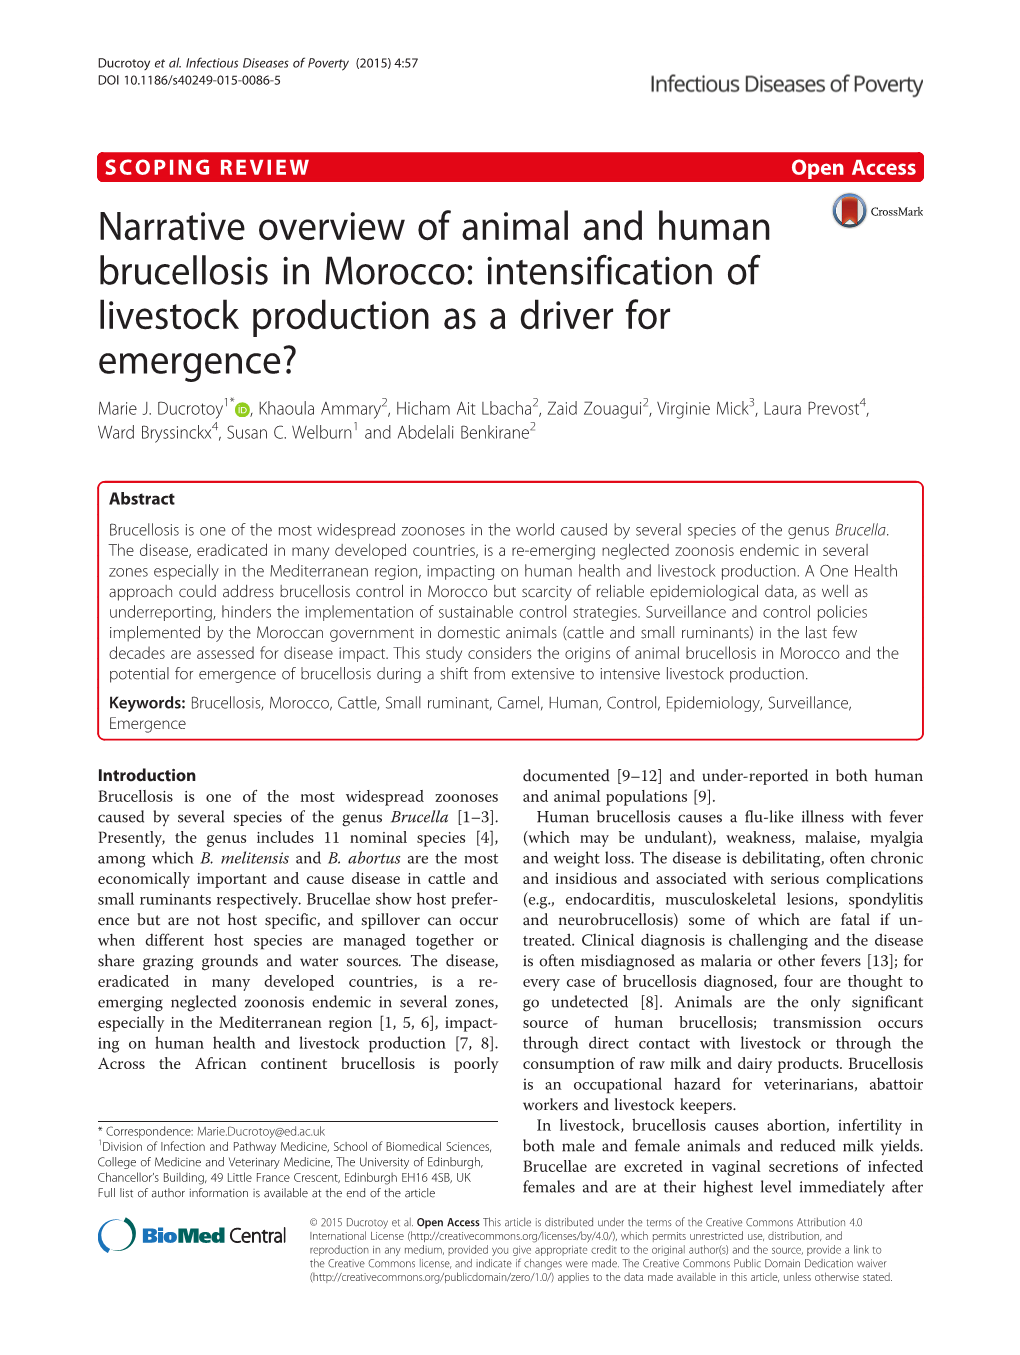 Narrative Overview of Animal and Human Brucellosis in Morocco: Intensification of Livestock Production As a Driver for Emergence? Marie J